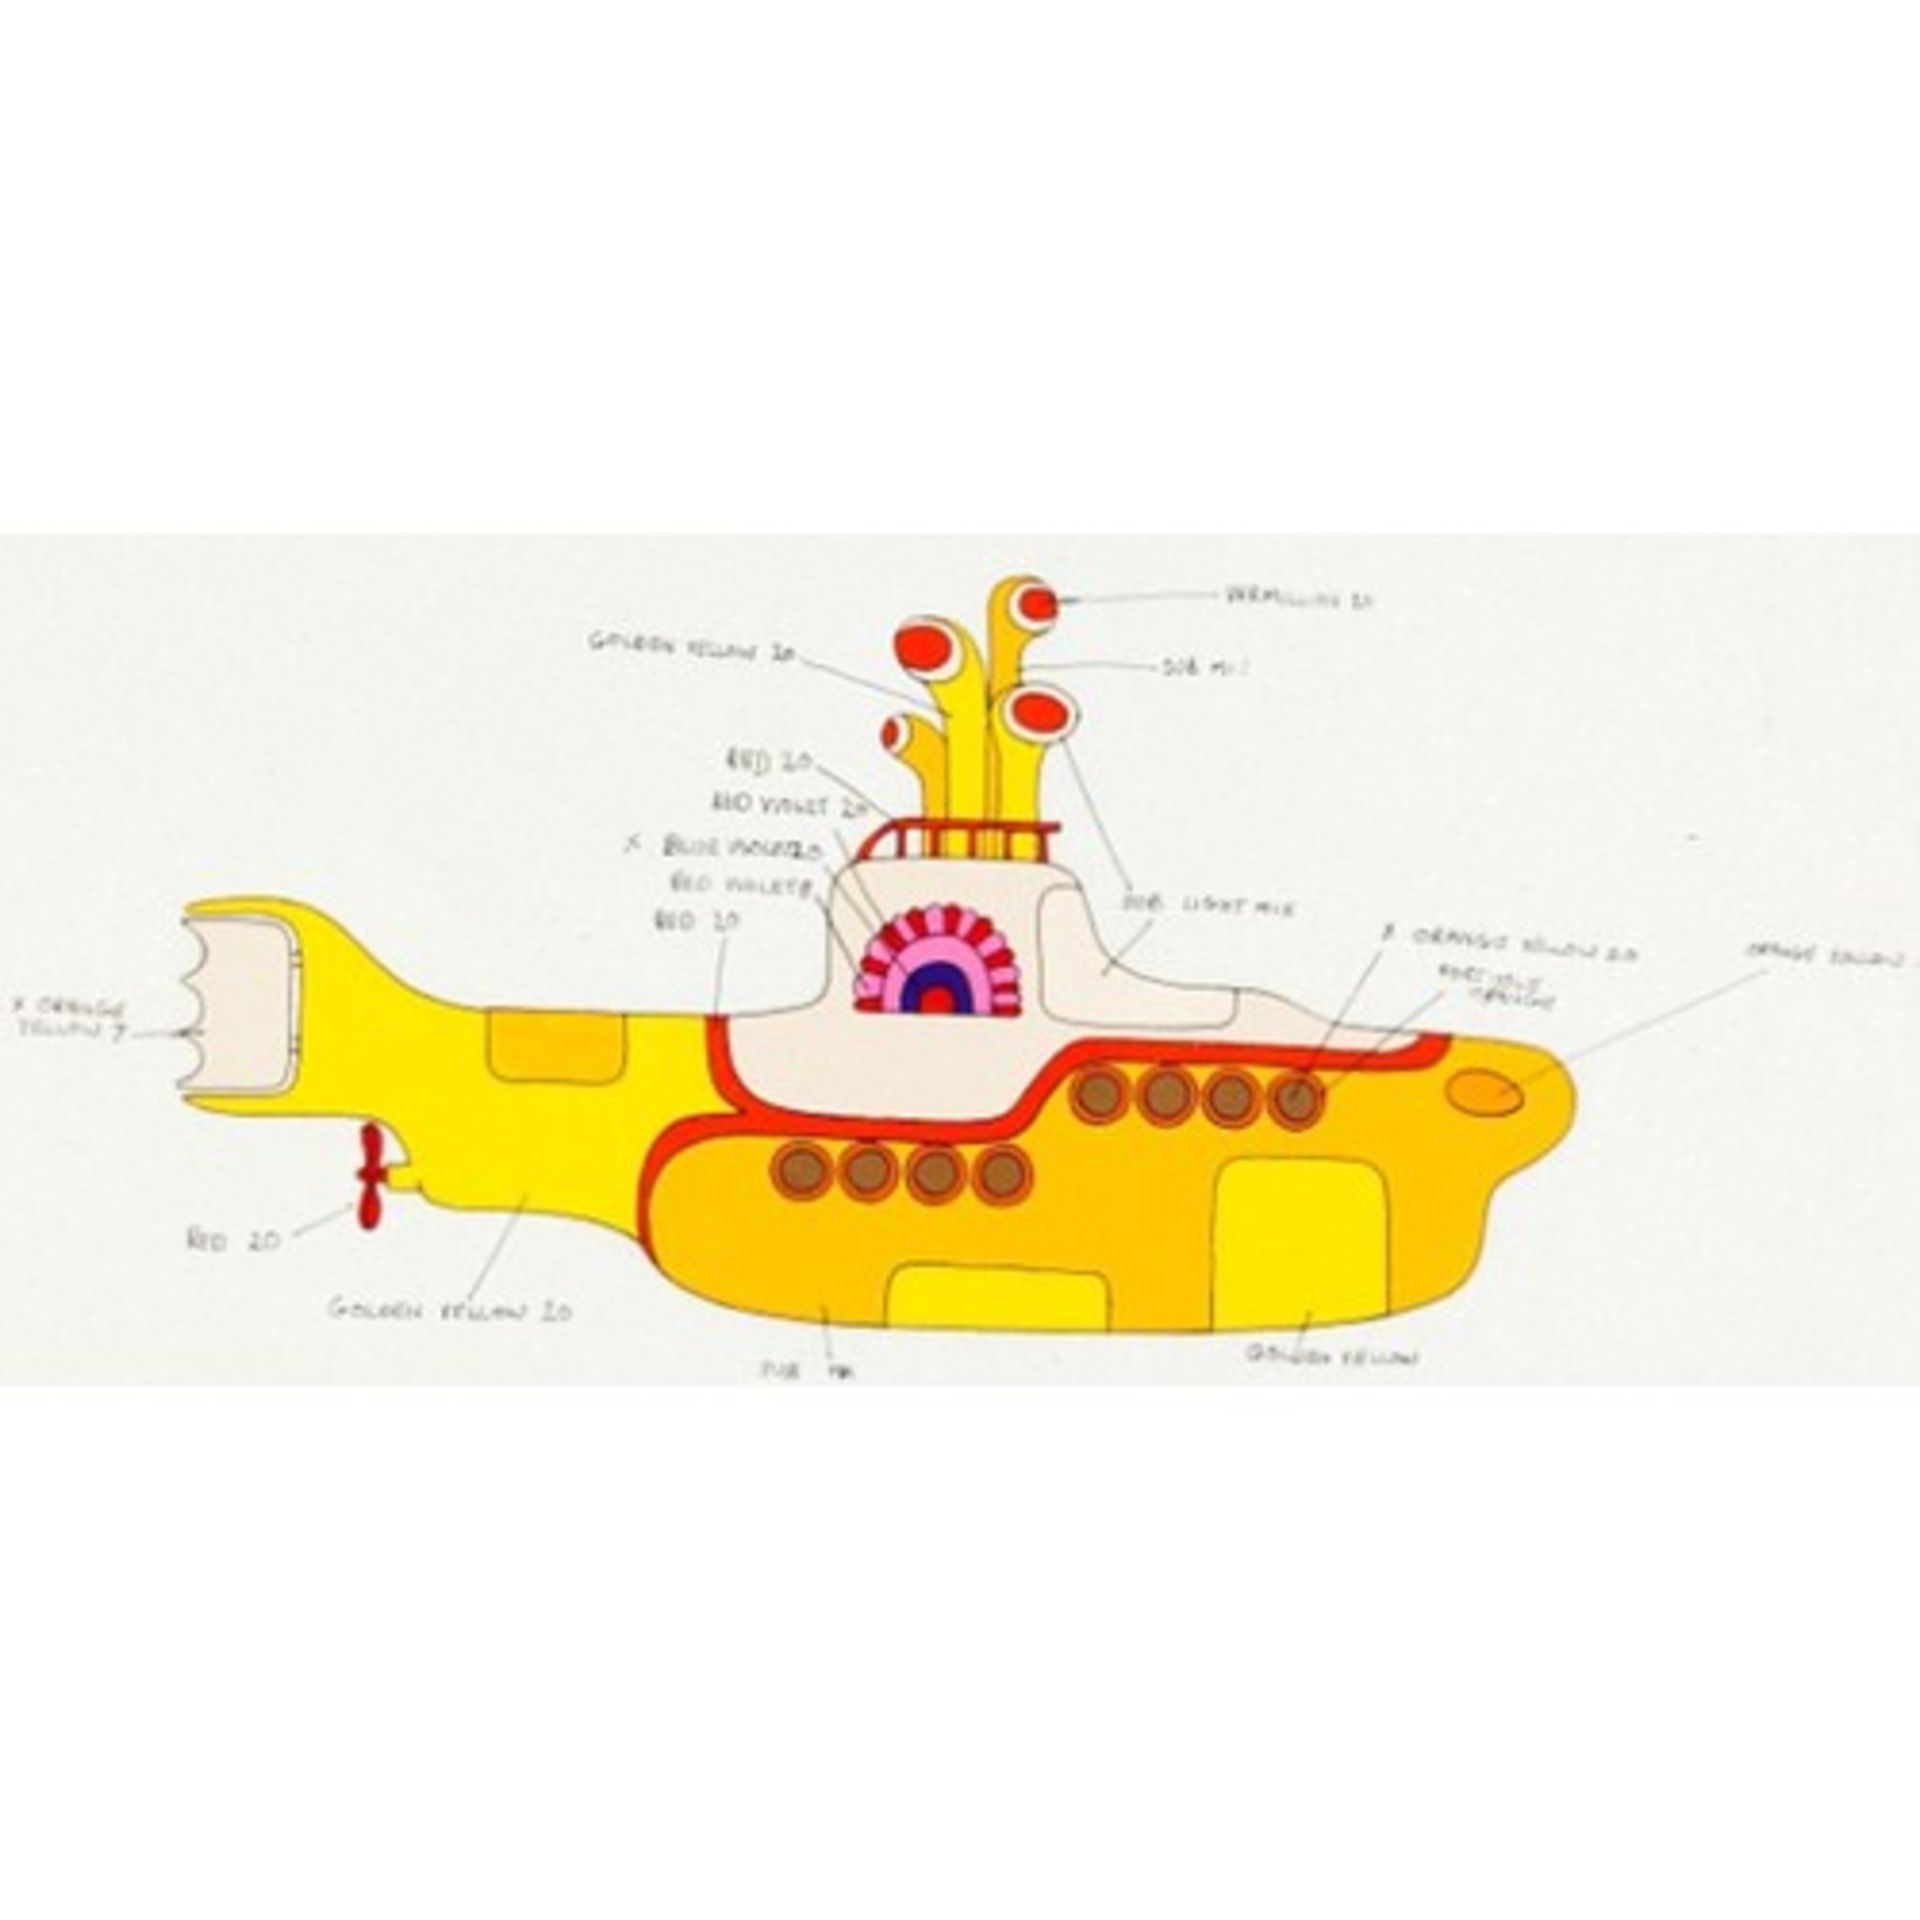 The Beatles one off Yellow Submarine carved wooden / metal reproduction model with working lights. - Image 6 of 6